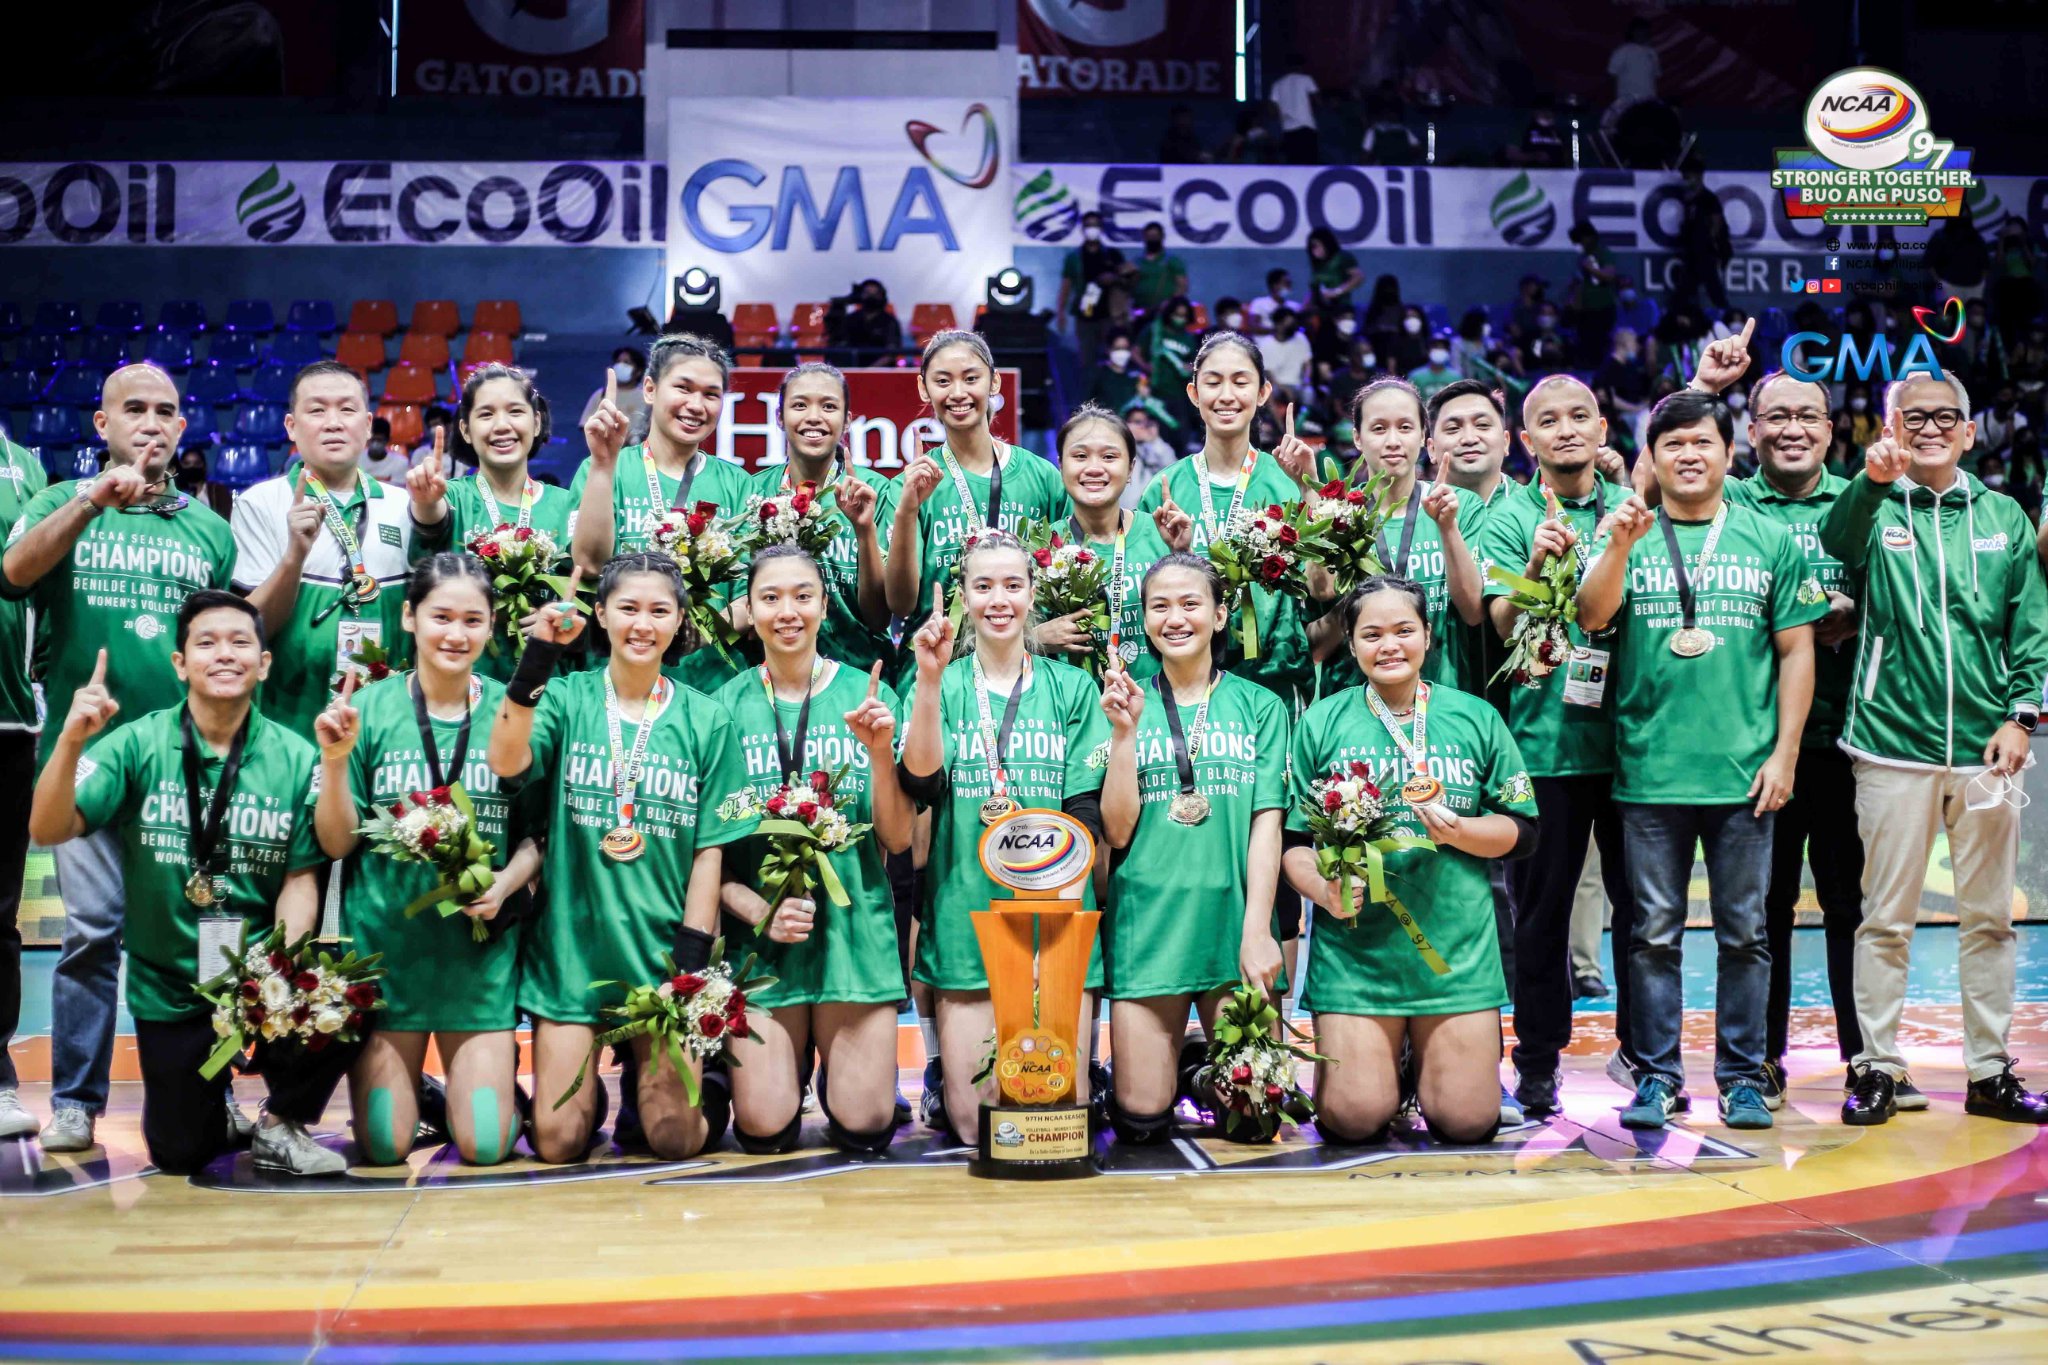 The St. Benilde Lady Blazers are the NCAA Season 97 women's volleyball champions